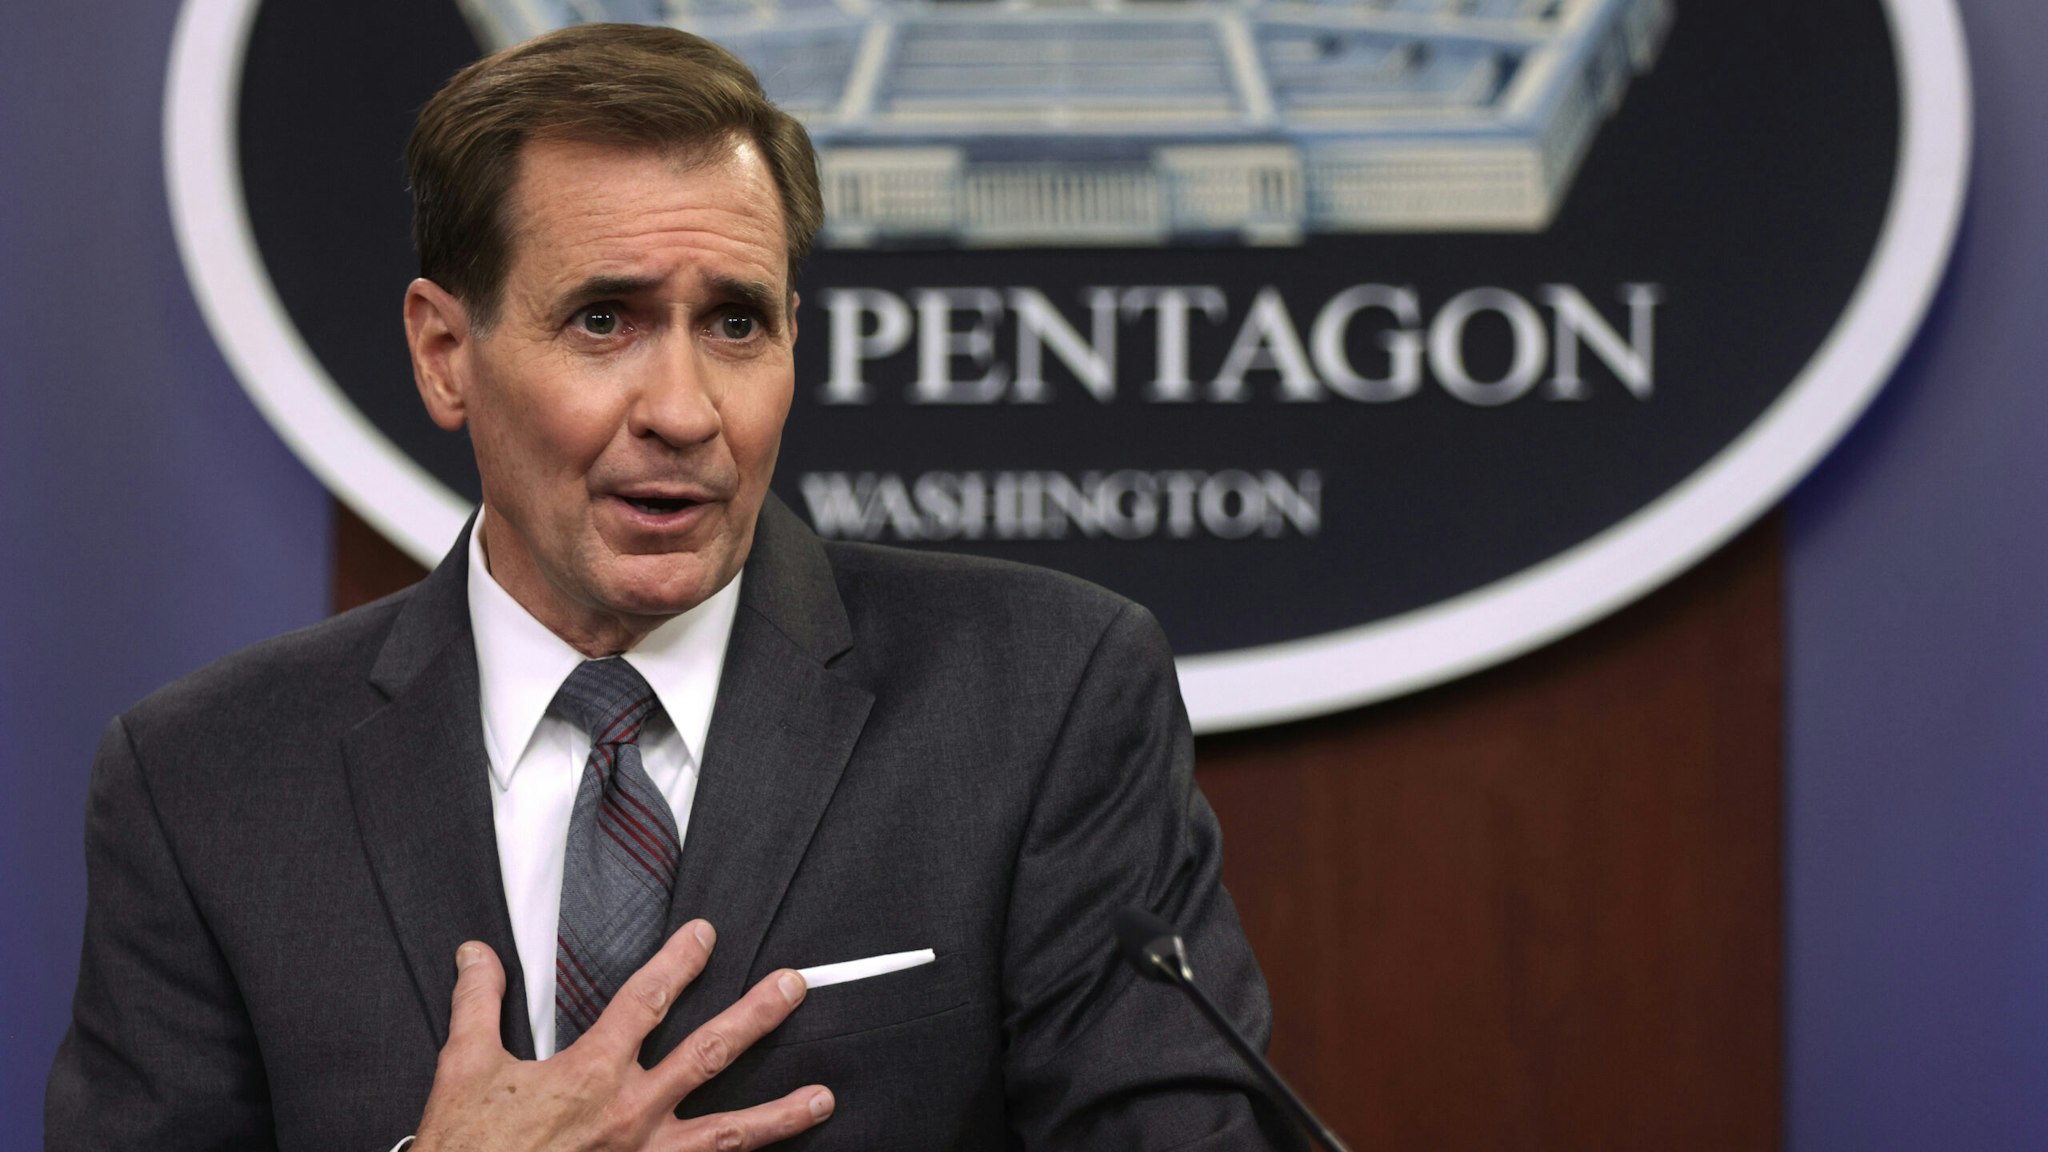 ARLINGTON, VIRGINIA - AUGUST 13: U.S. Department of Defense Press Secretary John Kirby participates in a news briefing at the Pentagon August 13, 2021 in Arlington, Virginia. Kirby discussed the deployment of 3,000 troops to Afghanistan to help to evacuate U.S. embassy personnel as the Taliban seized control of Kandahar and Herat, the second and third largest cities in Afghanistan, just weeks prior to President Joe Biden's plan to completely withdraw U.S. troops there.